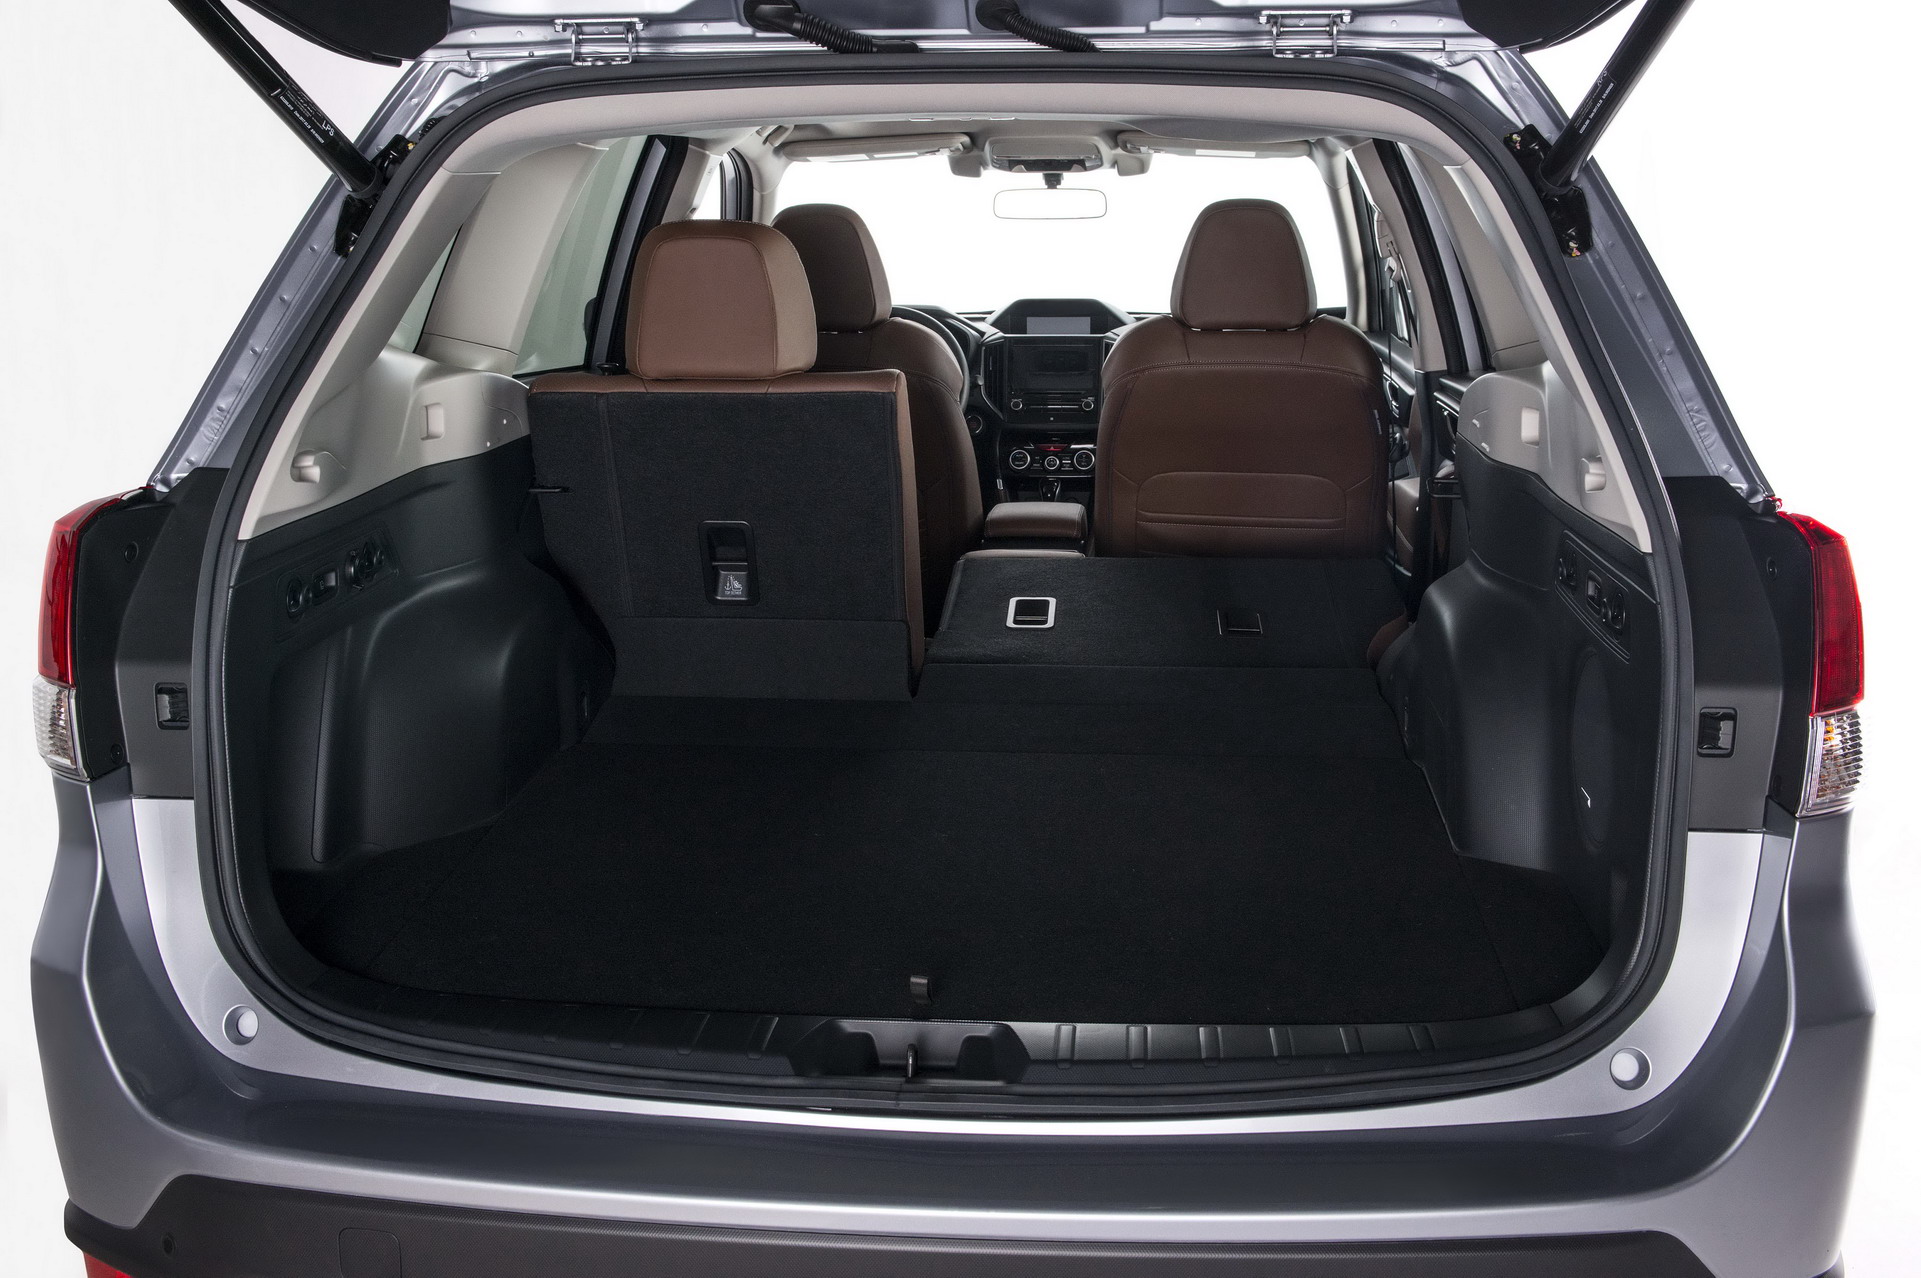 2019 Subaru Forester Plays It Safe Gets More Room And Tech